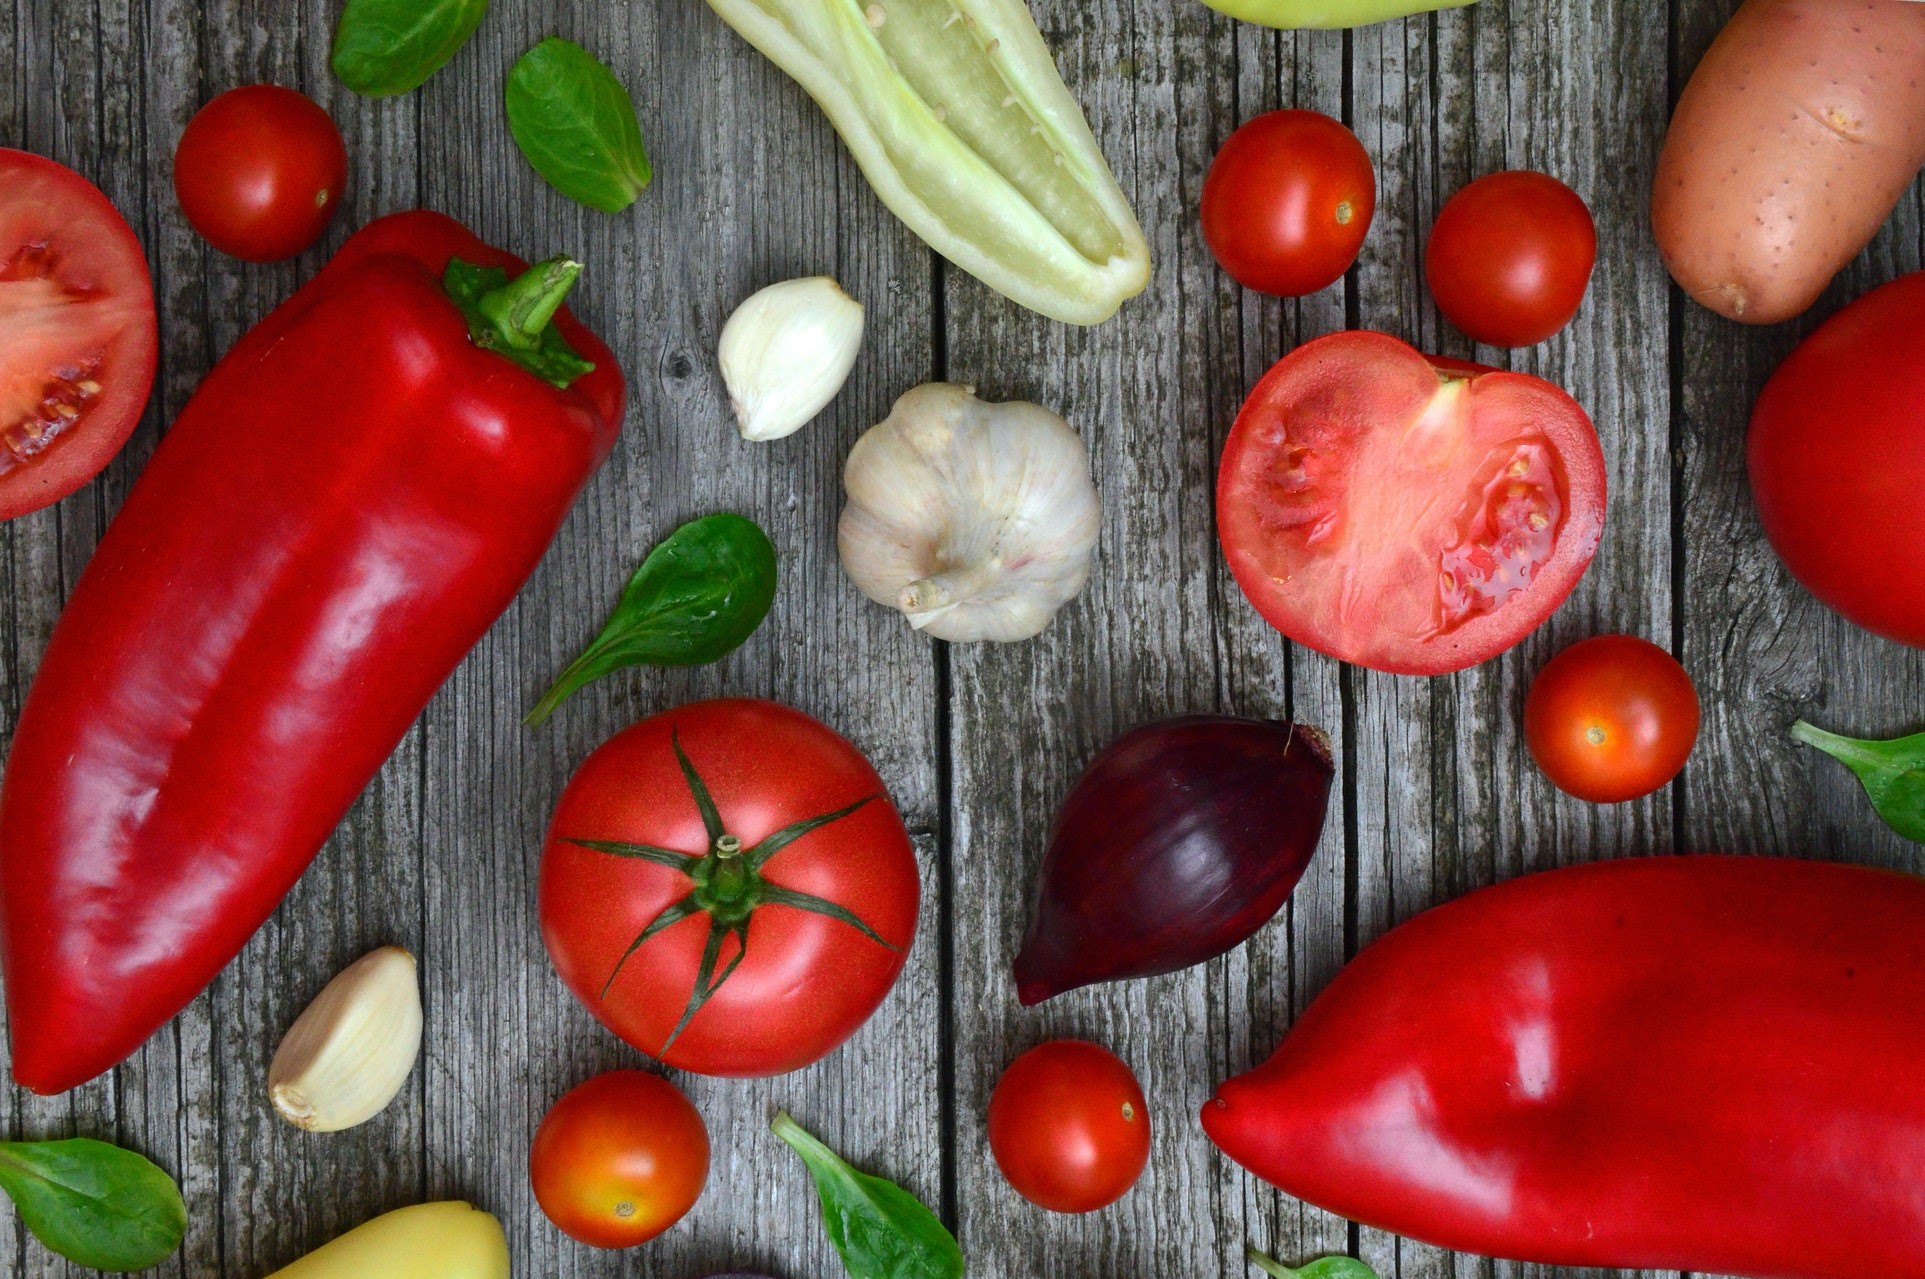 Food scientists work to understand the chemical makeup of the freshest ingredients.